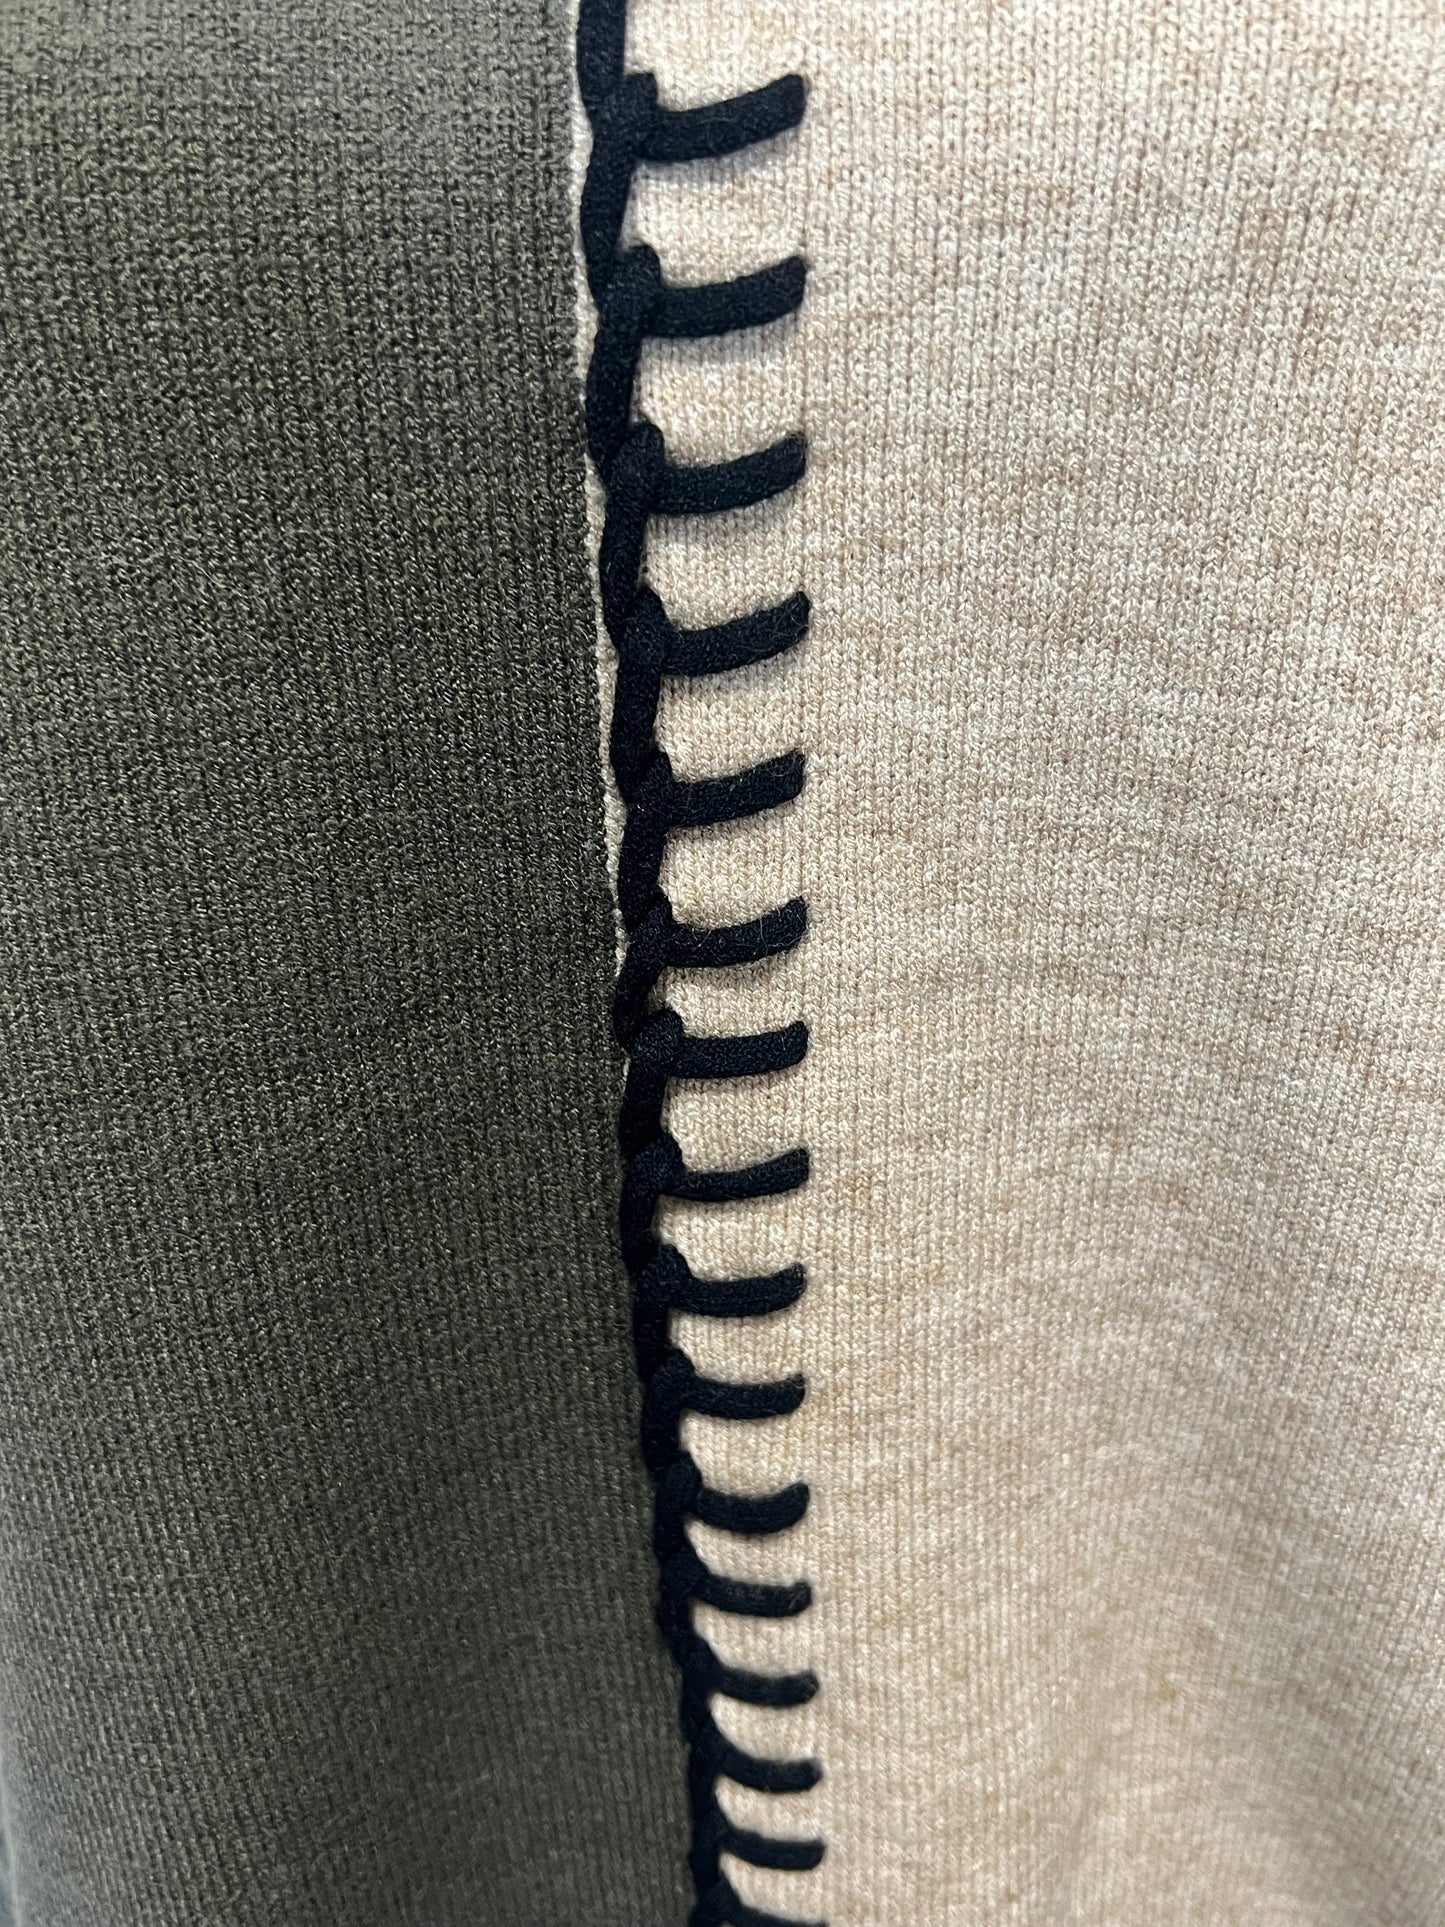 Crew Neck with Whip Stitching-11040